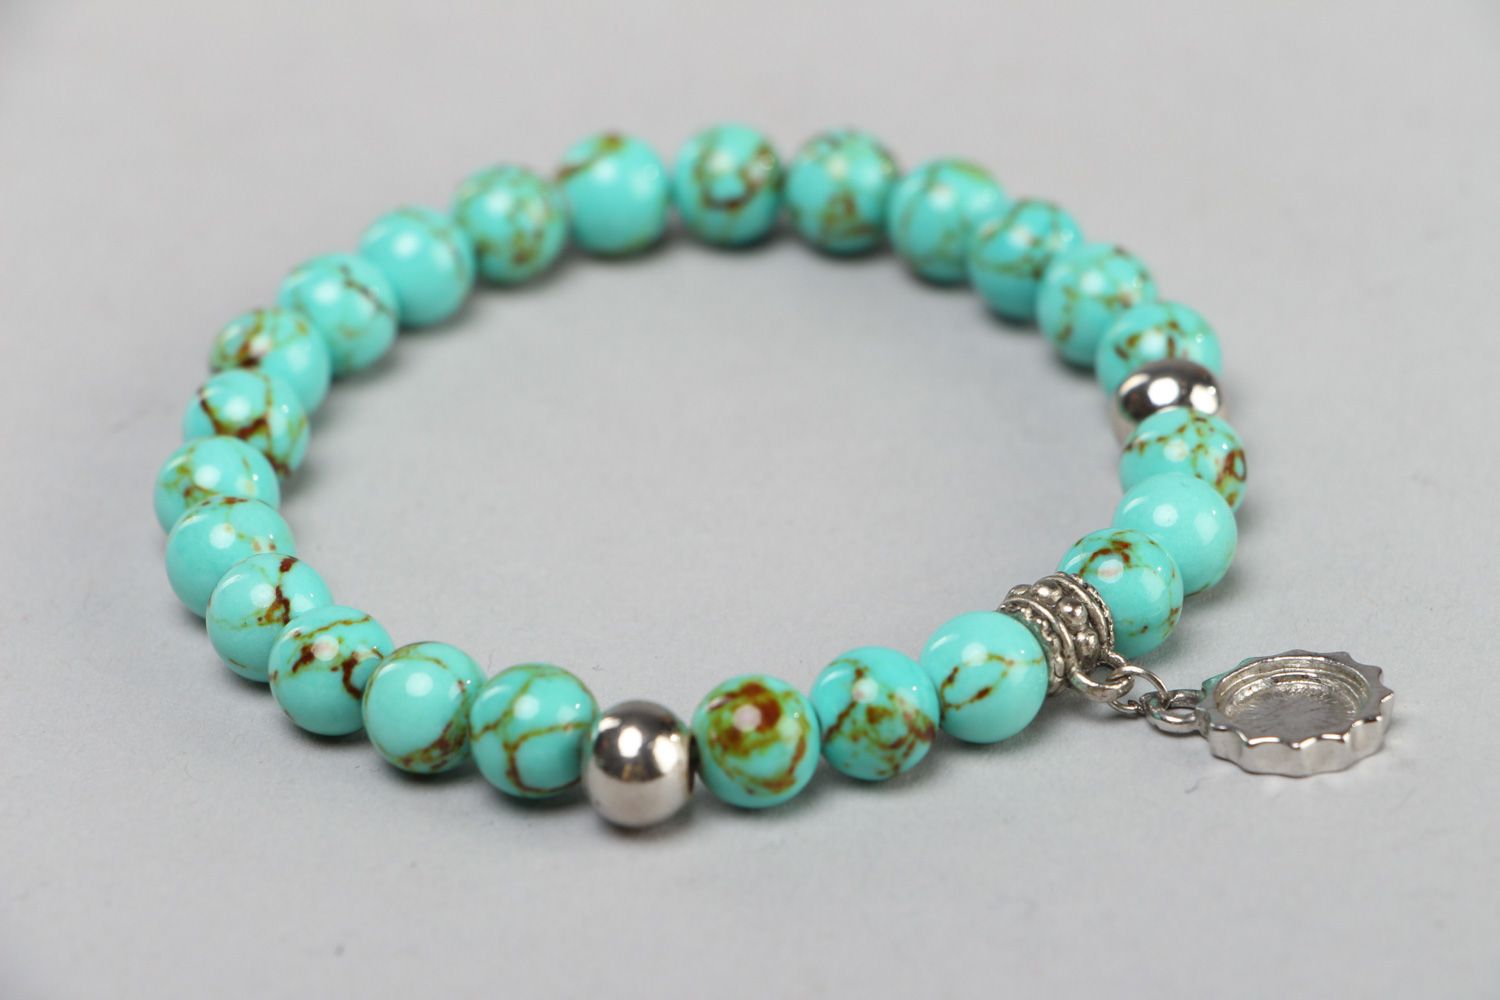 Handmade stretch wrist bracelet with natural turquoise beads and metal charm photo 1